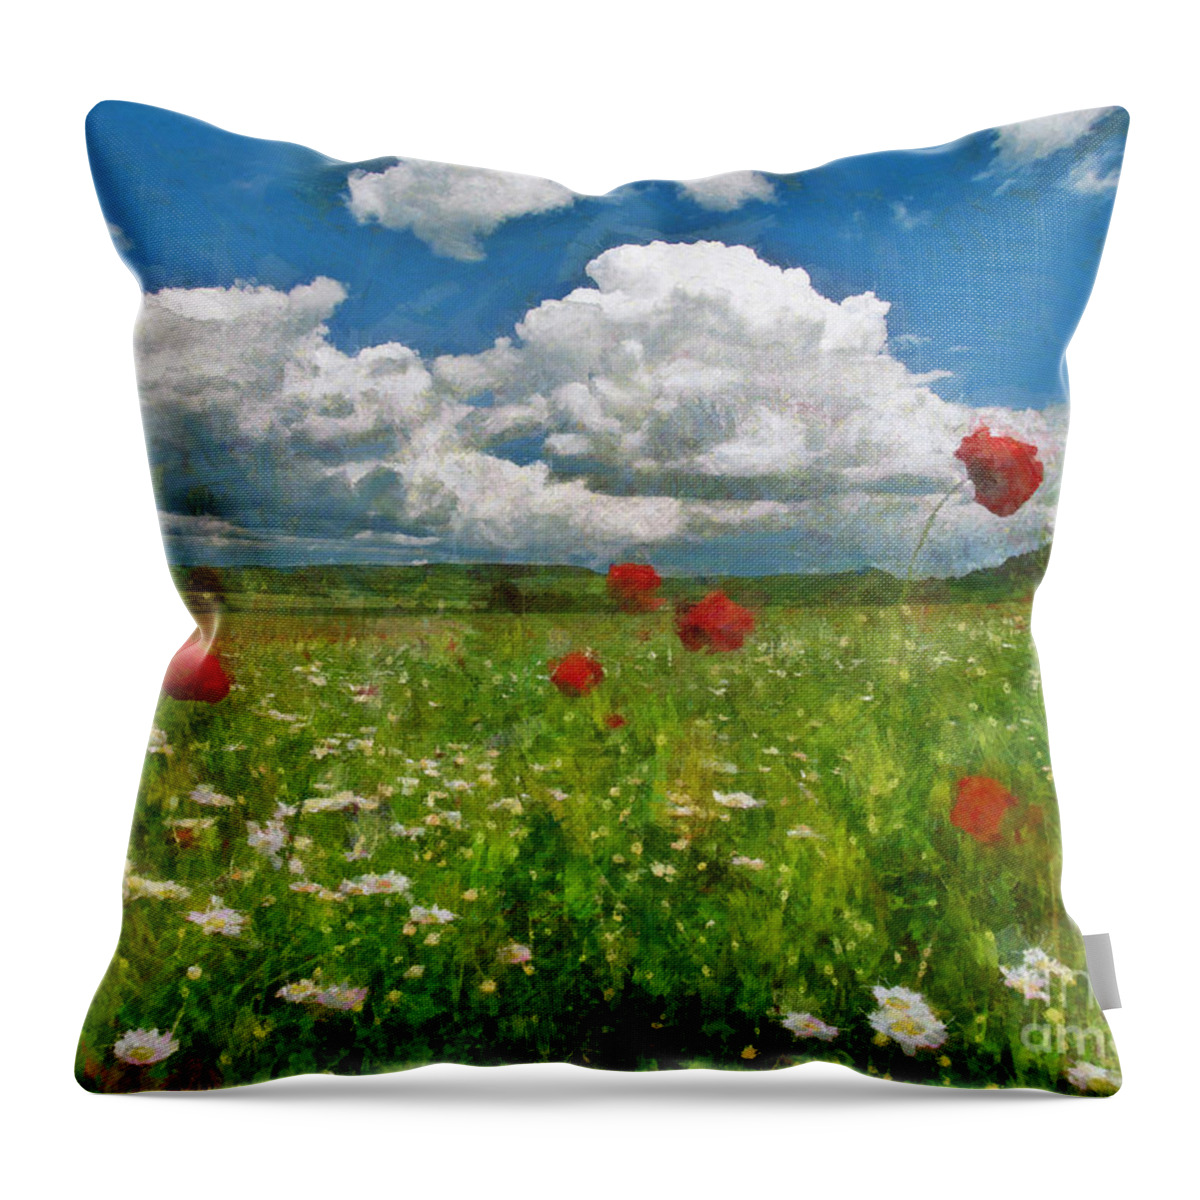 Landscape Throw Pillow featuring the painting Summer landscape by Alexa Szlavics